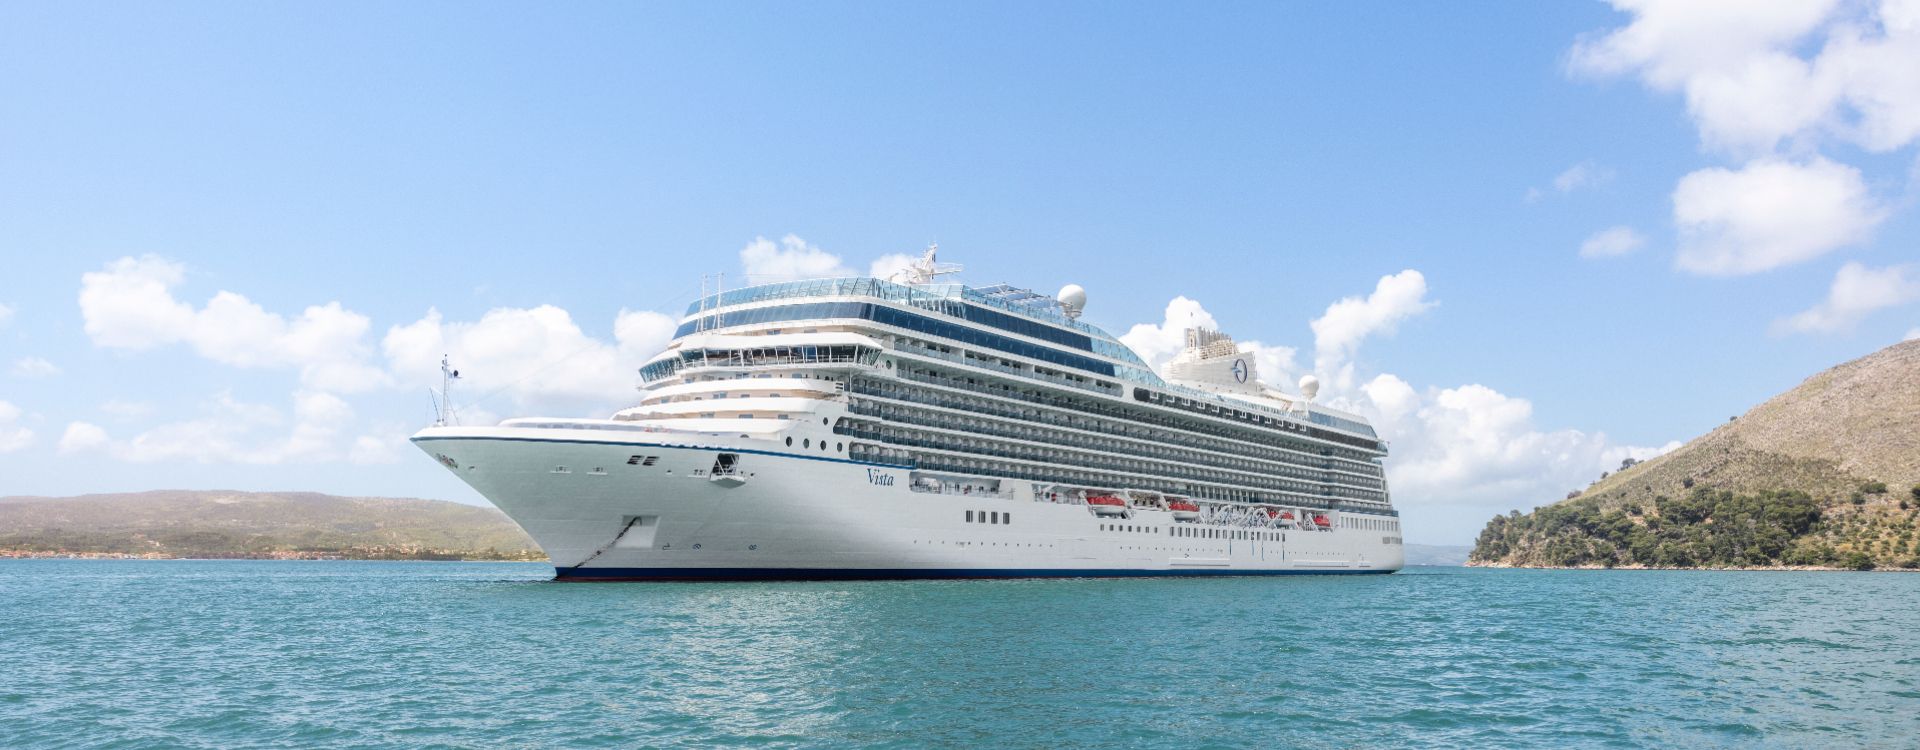 Oceania Cruises Vista is a large cruise ship is floating in the water